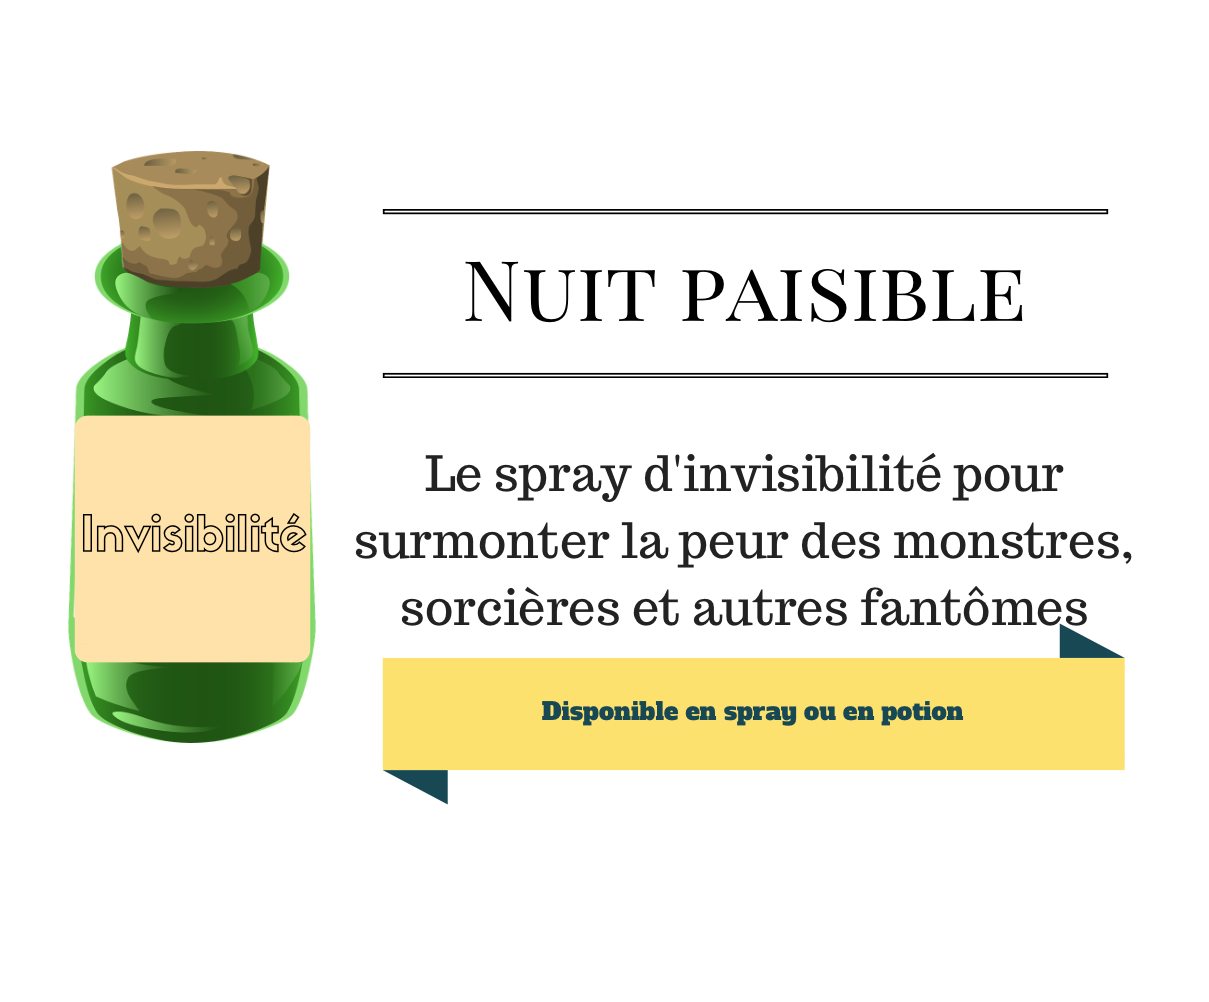 nuit paisible